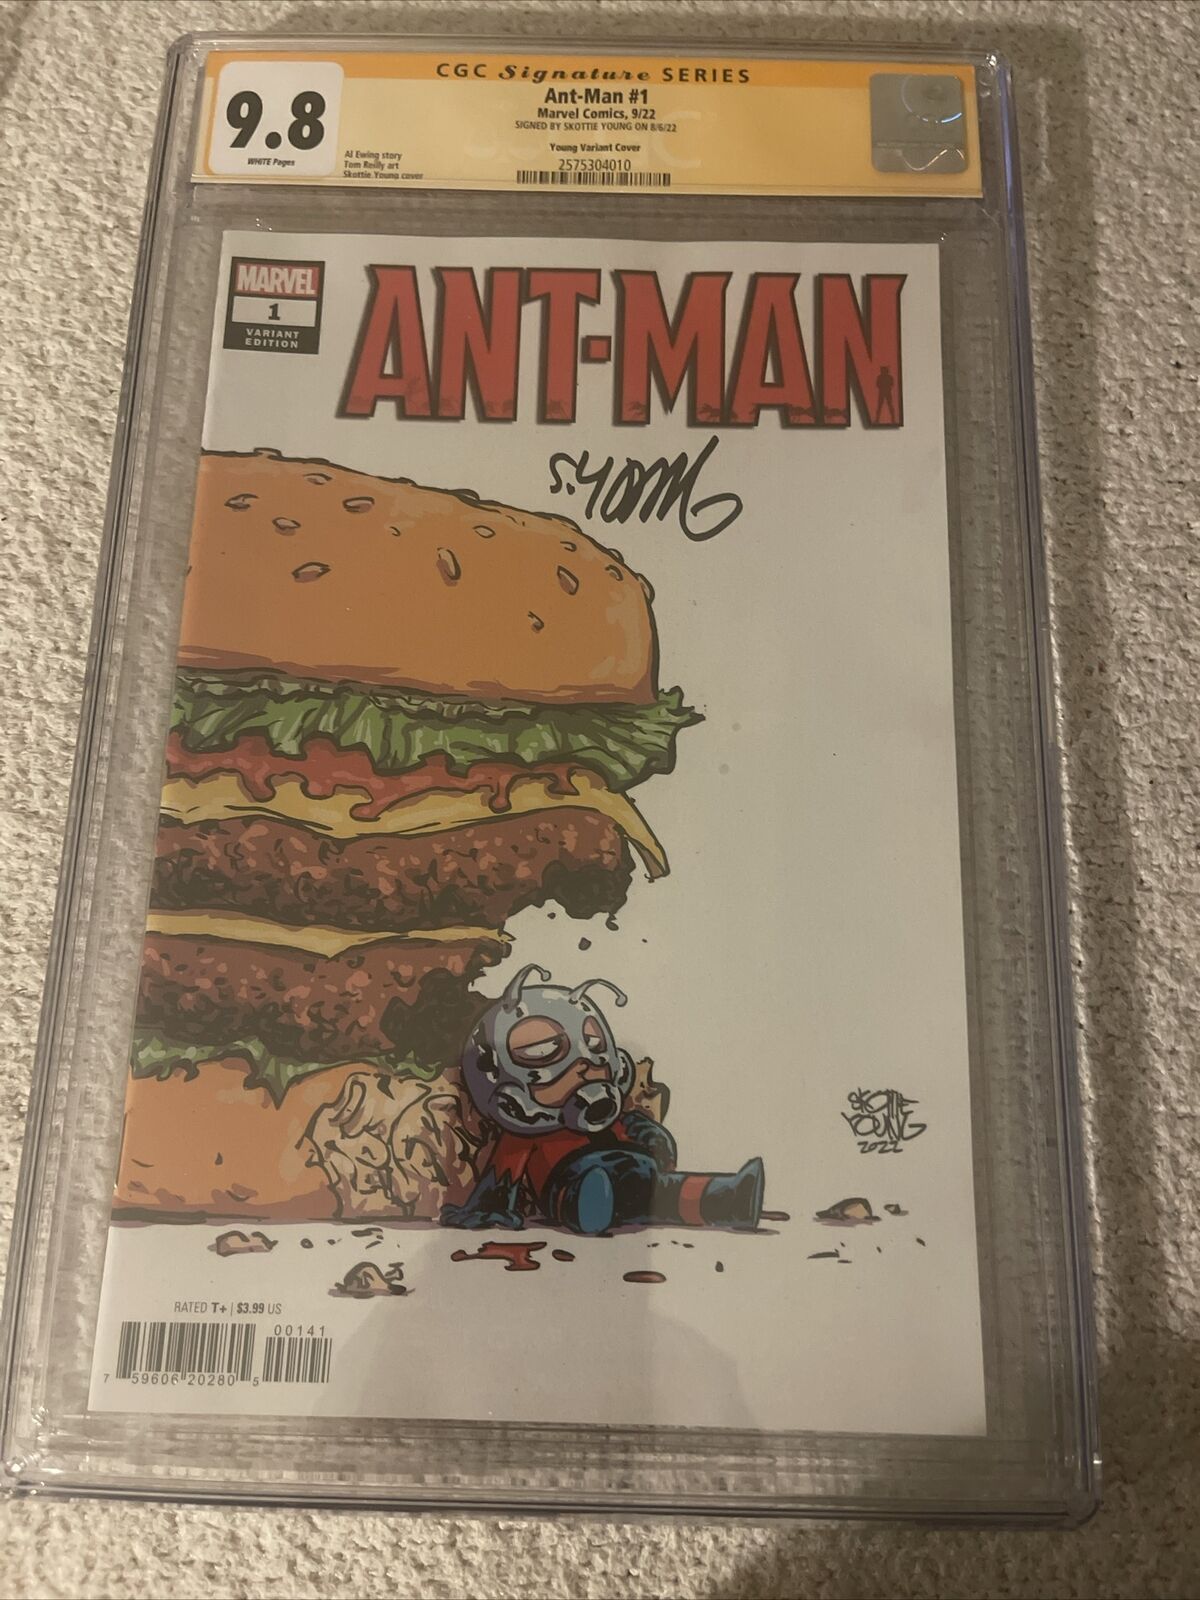 Ant -man #1 cgc 9.8 signed skottie young